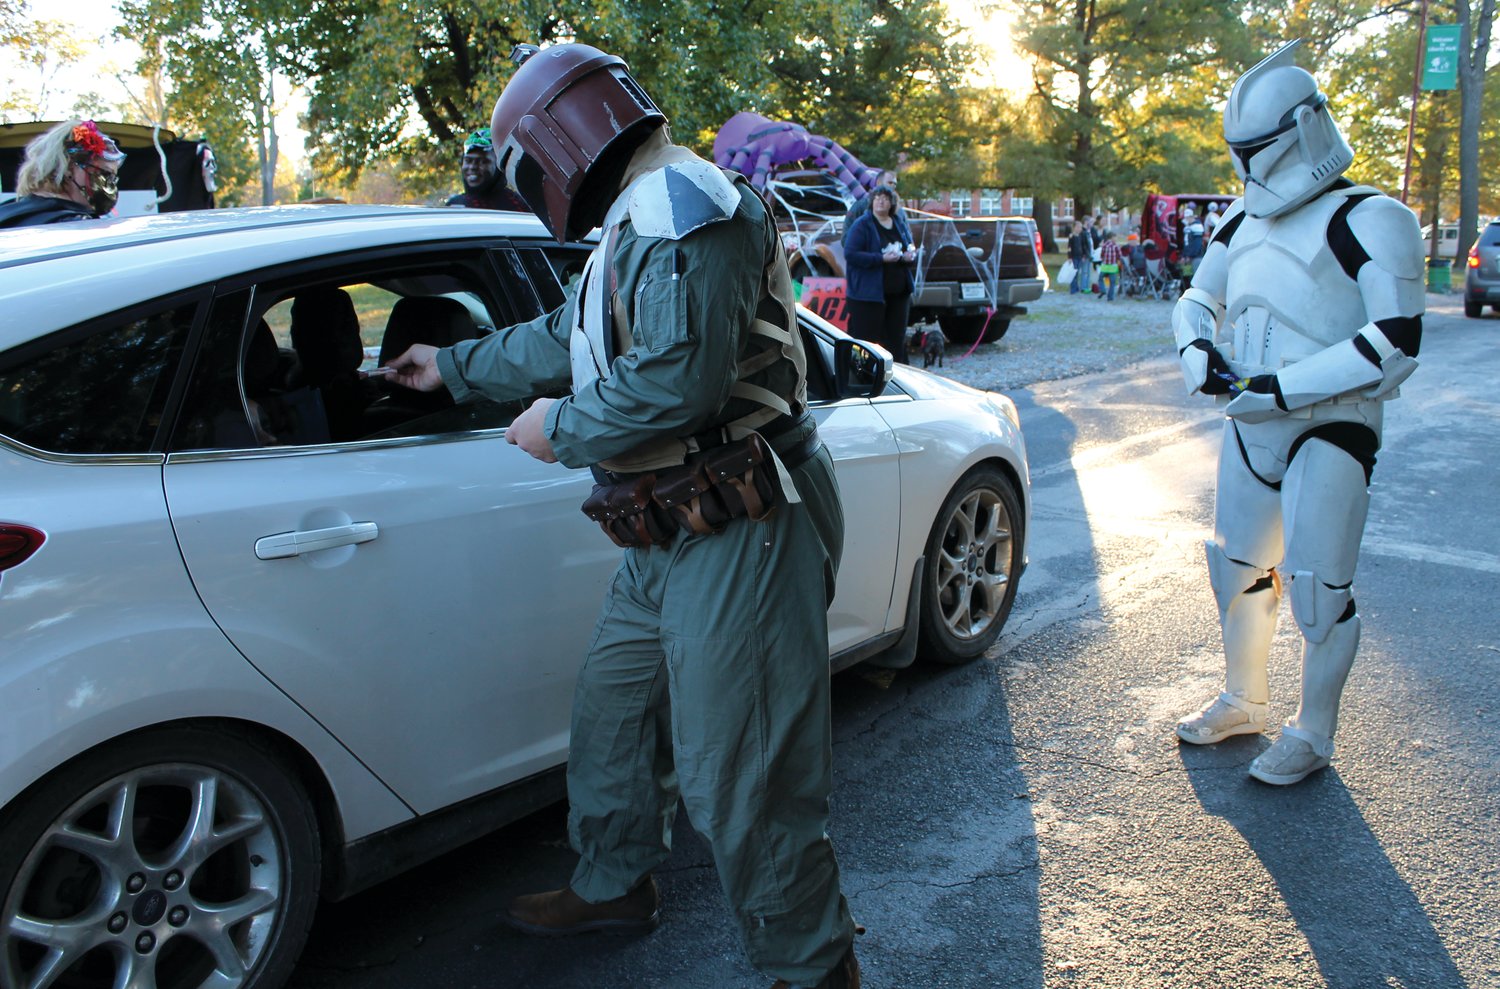 A Mandalorian, aka Brent Woodside, and a Storm Trooper give treats to children in a vehicle passing by their booth at the 2020 drive-thru trunk-or-treat event hosted by Sedalia Parks and Recreation at Liberty Park. Brent and his wife, Kayla, are artists for Disney and LucasFilms, so their Star Wars costumes were appropriate for the event. As they ran out of candy, they began drawing quick sketches of Baby Yoda to hand out to kids.